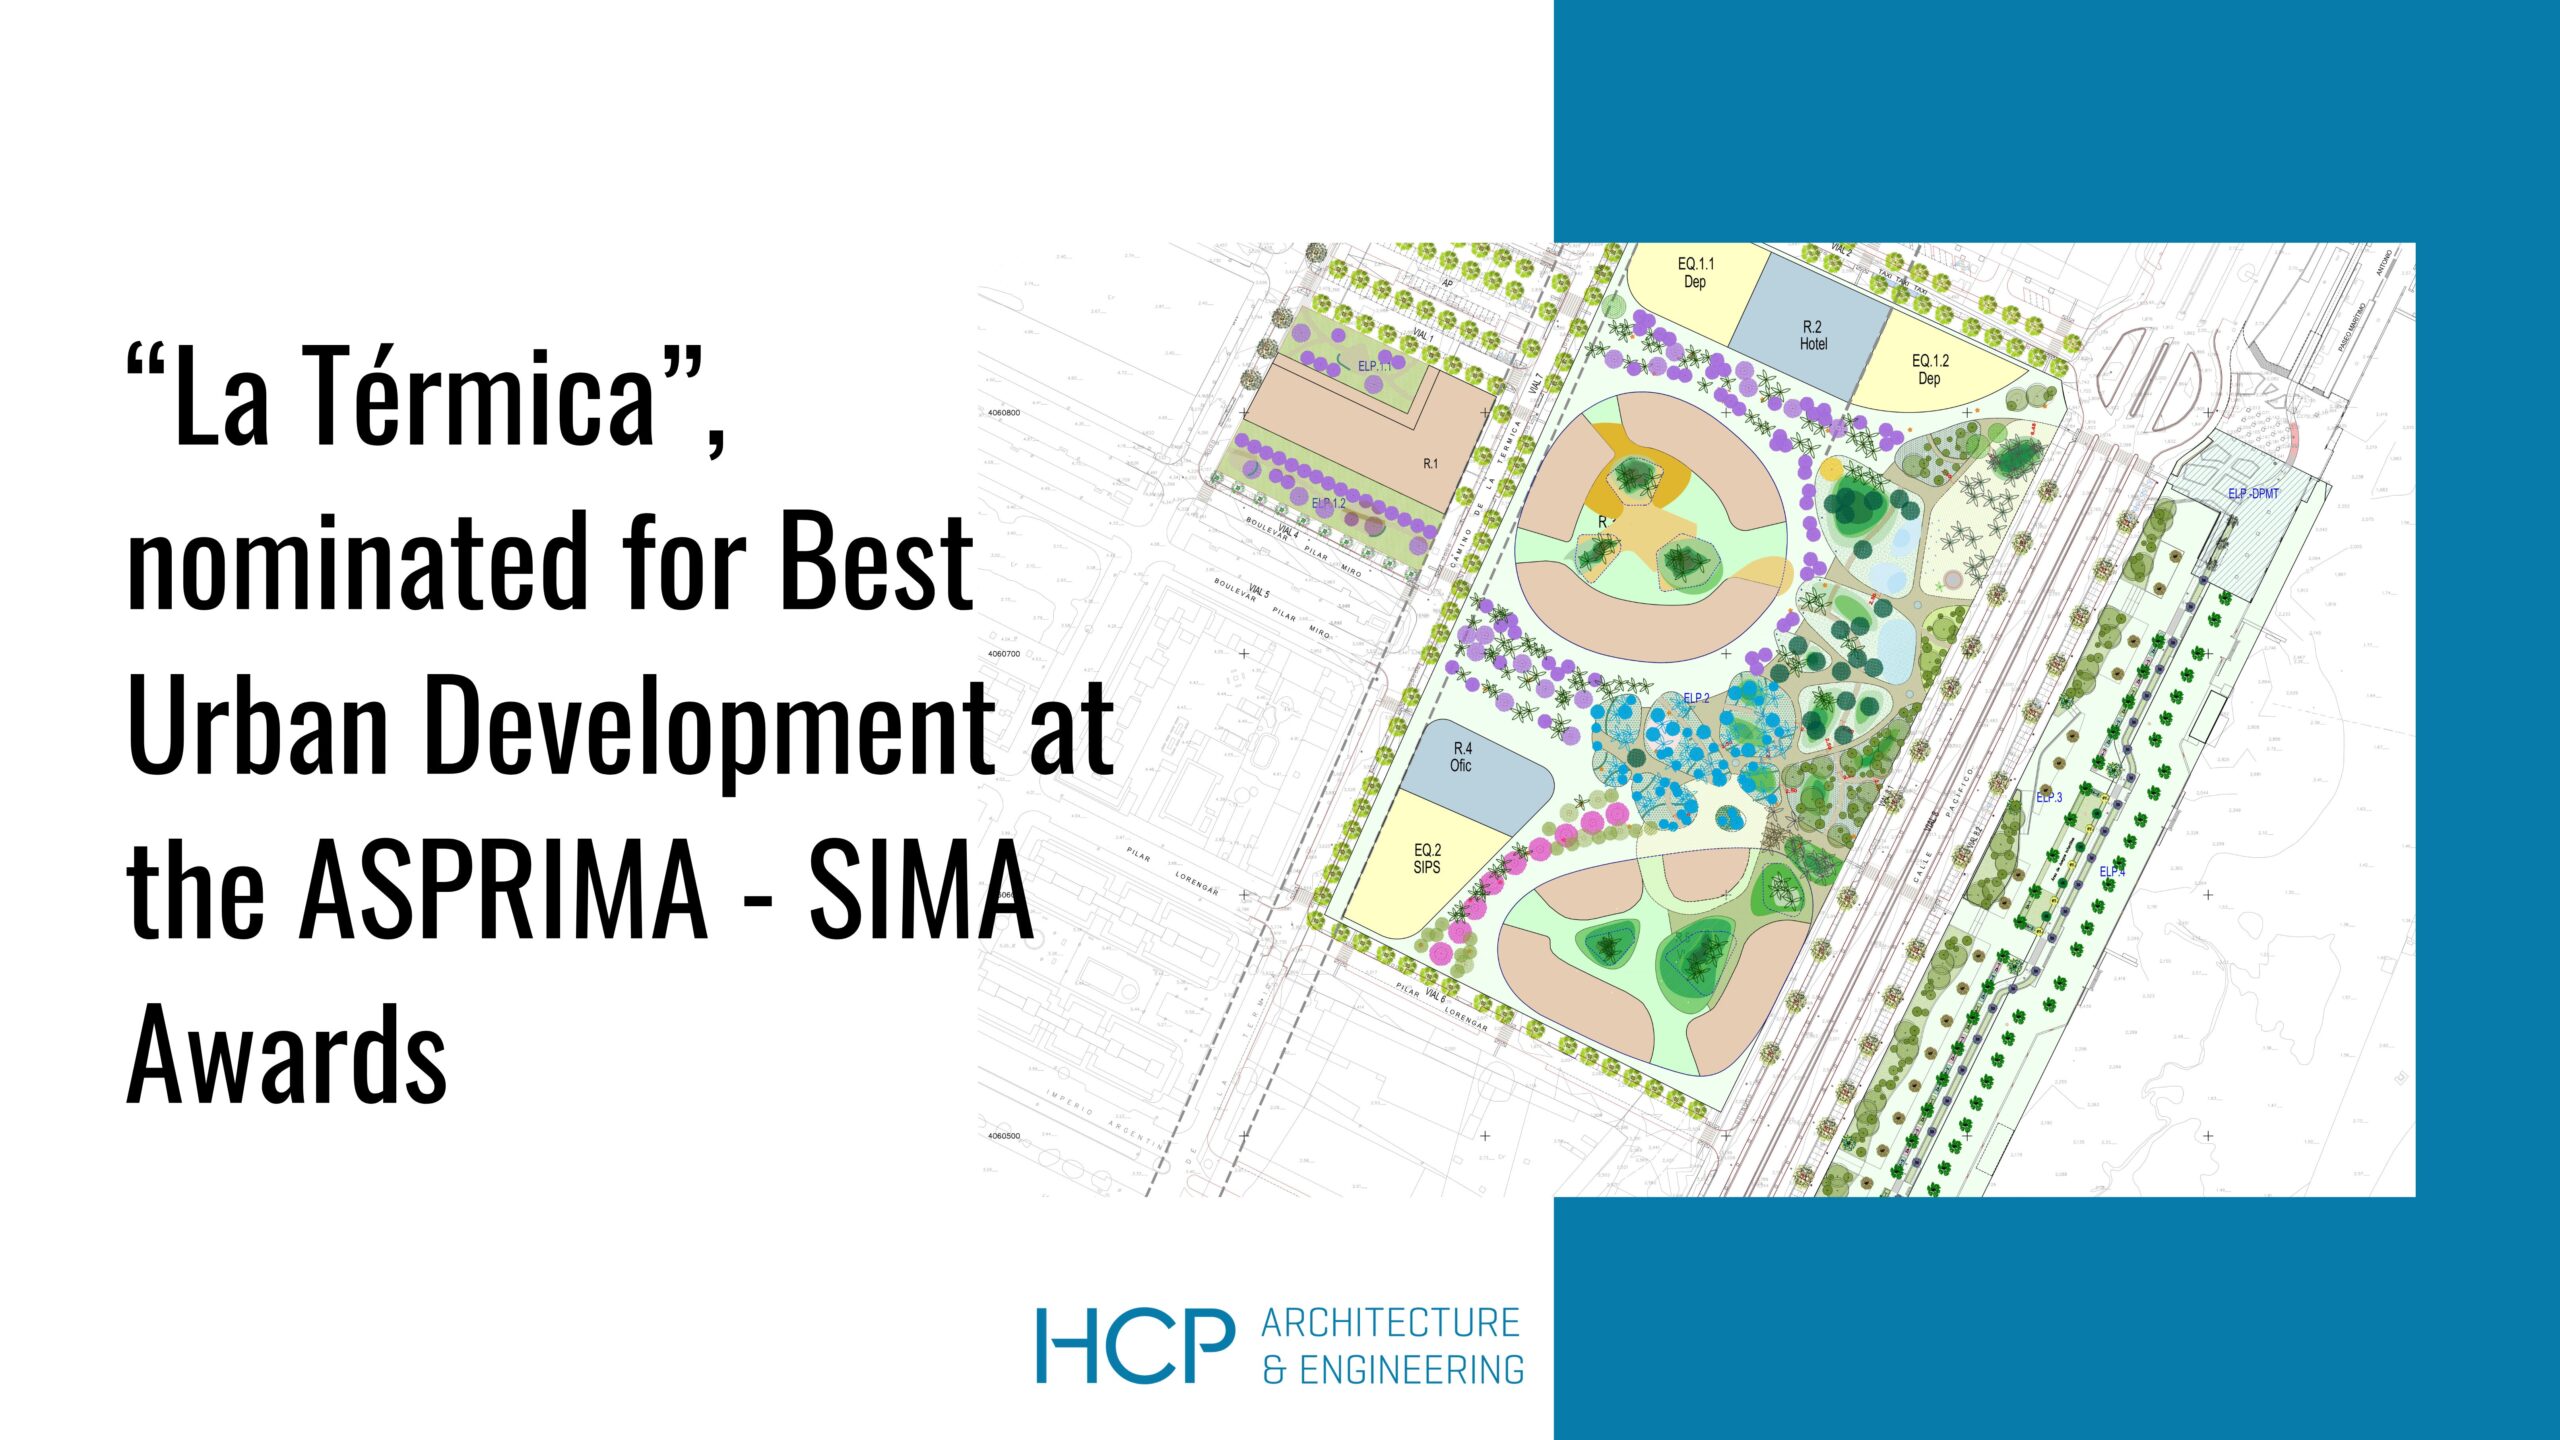 La Térmica, an urban regeneration project in Malaga by the HCP architectural studio, nominated for the ASPRIMA-SIMA 2024 awards.